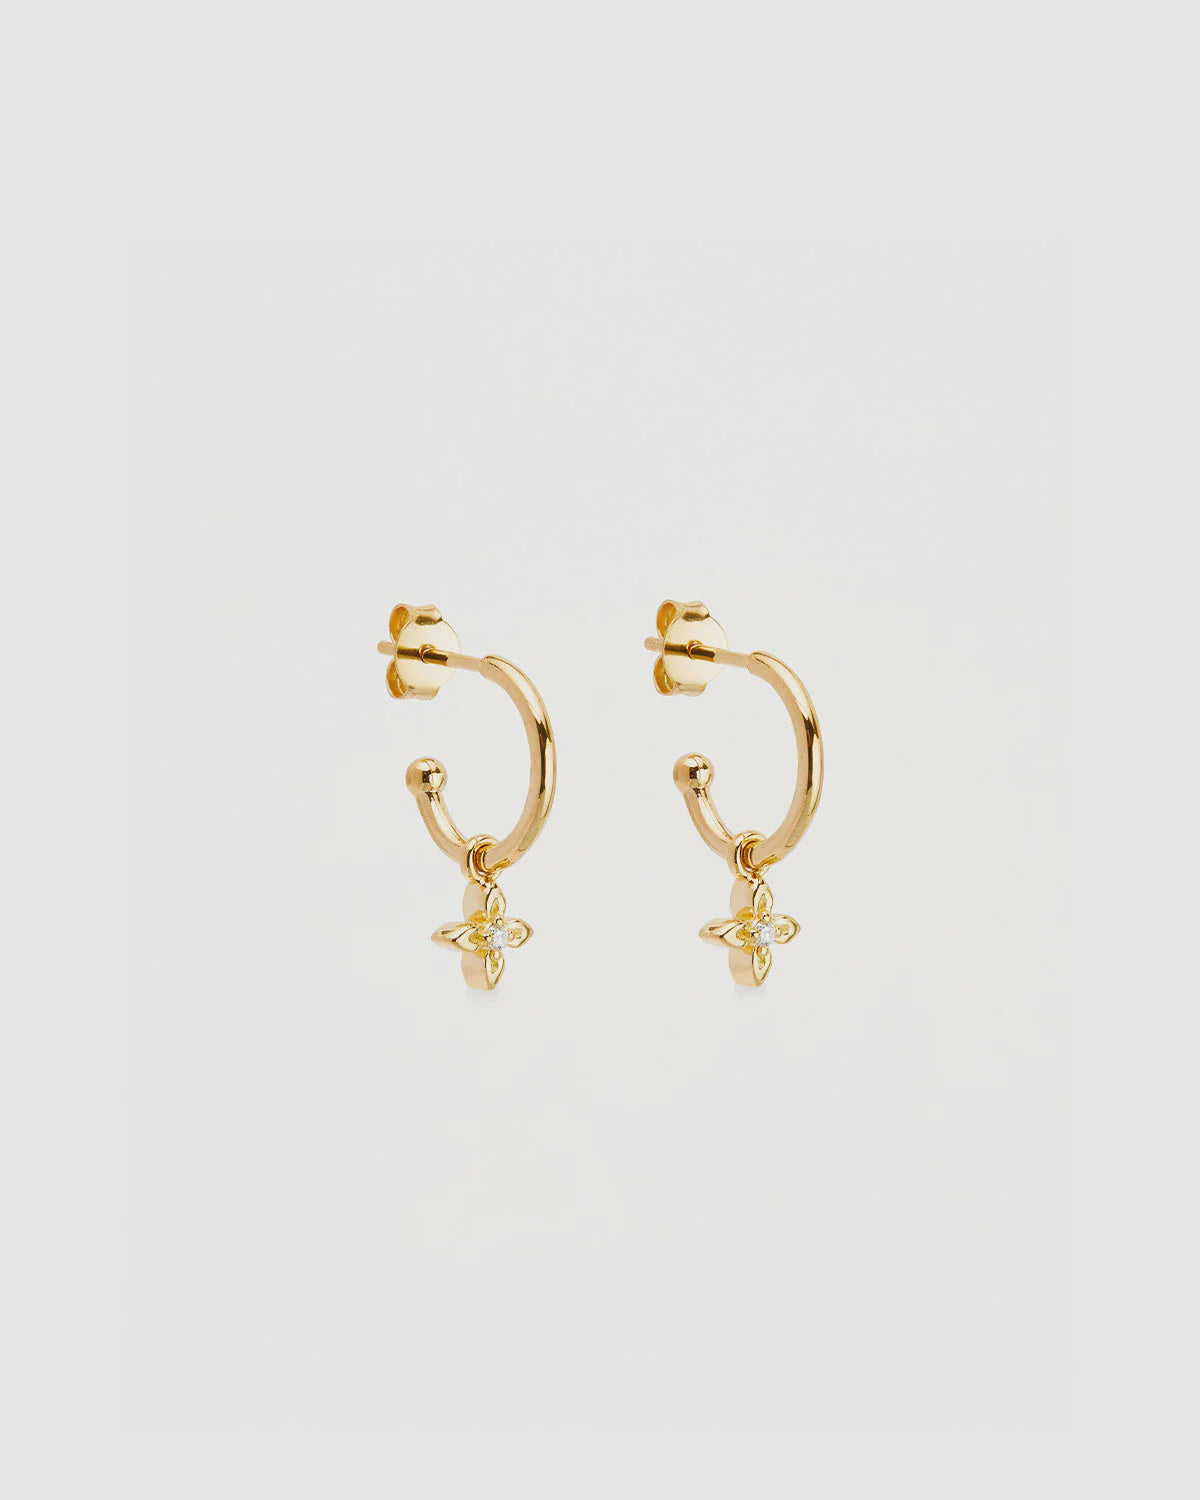 By Charlotte - Live in Light Hoops 18k Gold Vermeil